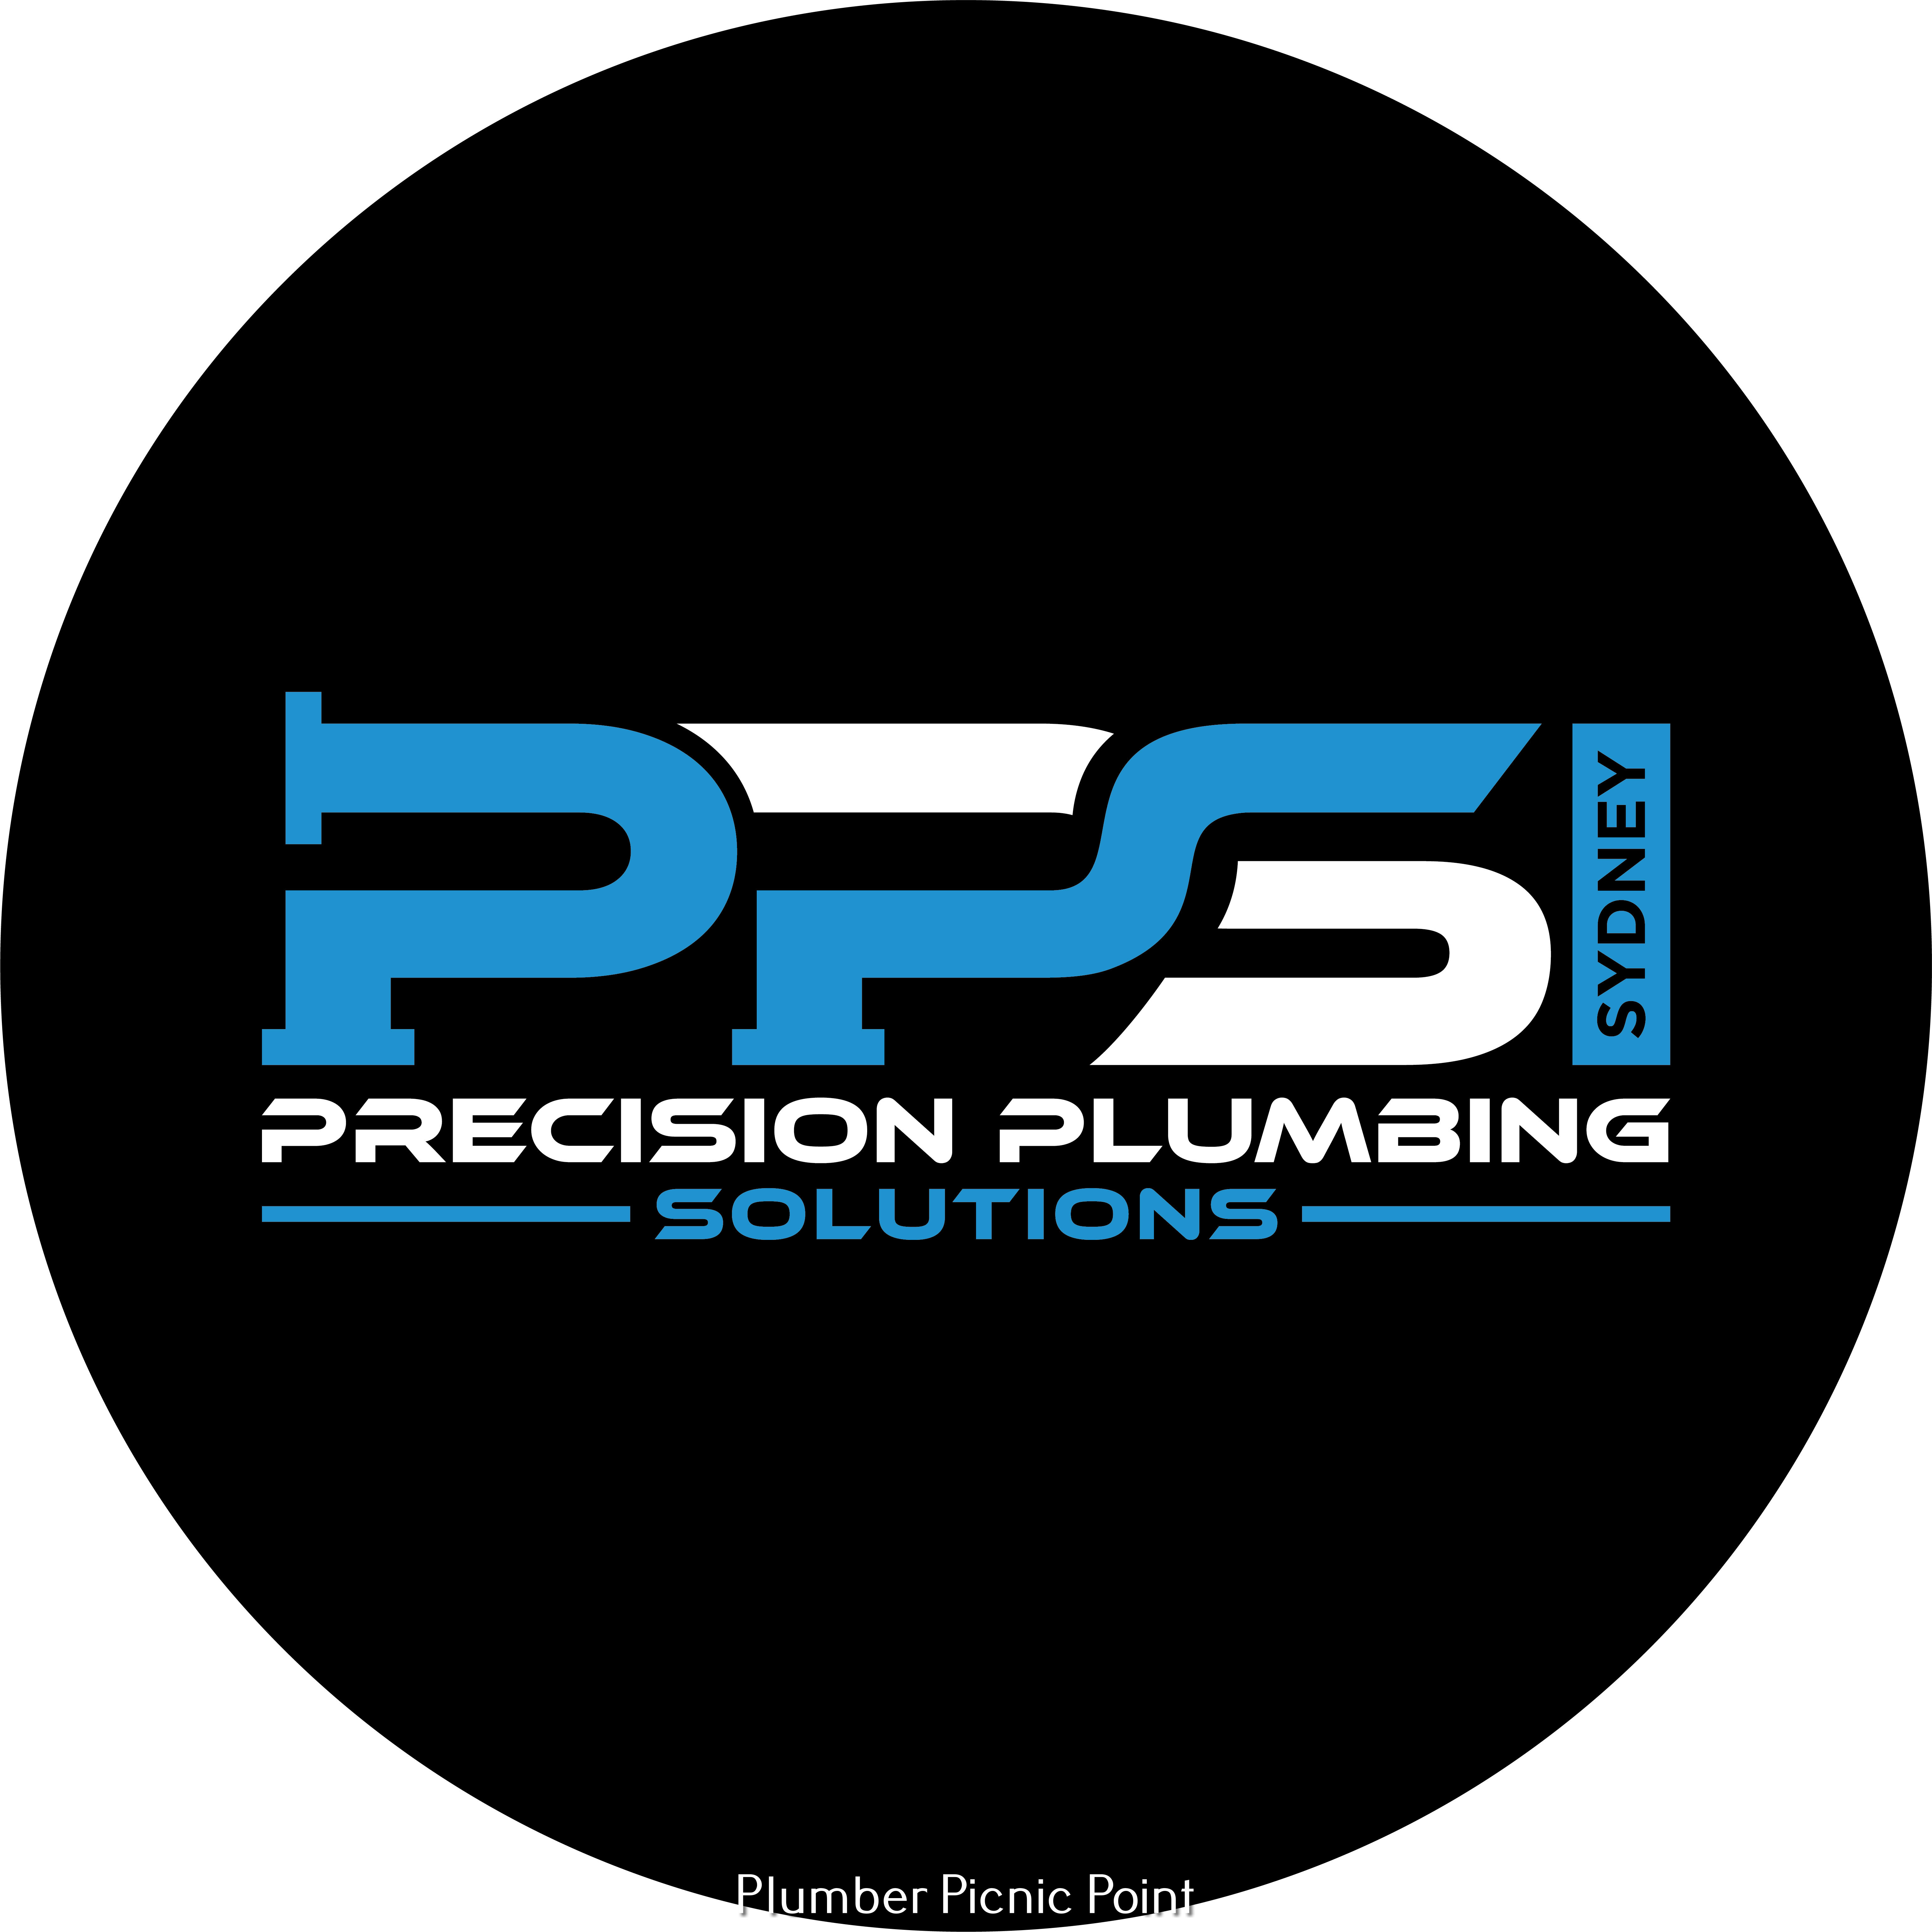 Precision Plumbing Solutions Shares Tips on Choosing the Right Plumbing Fixtures